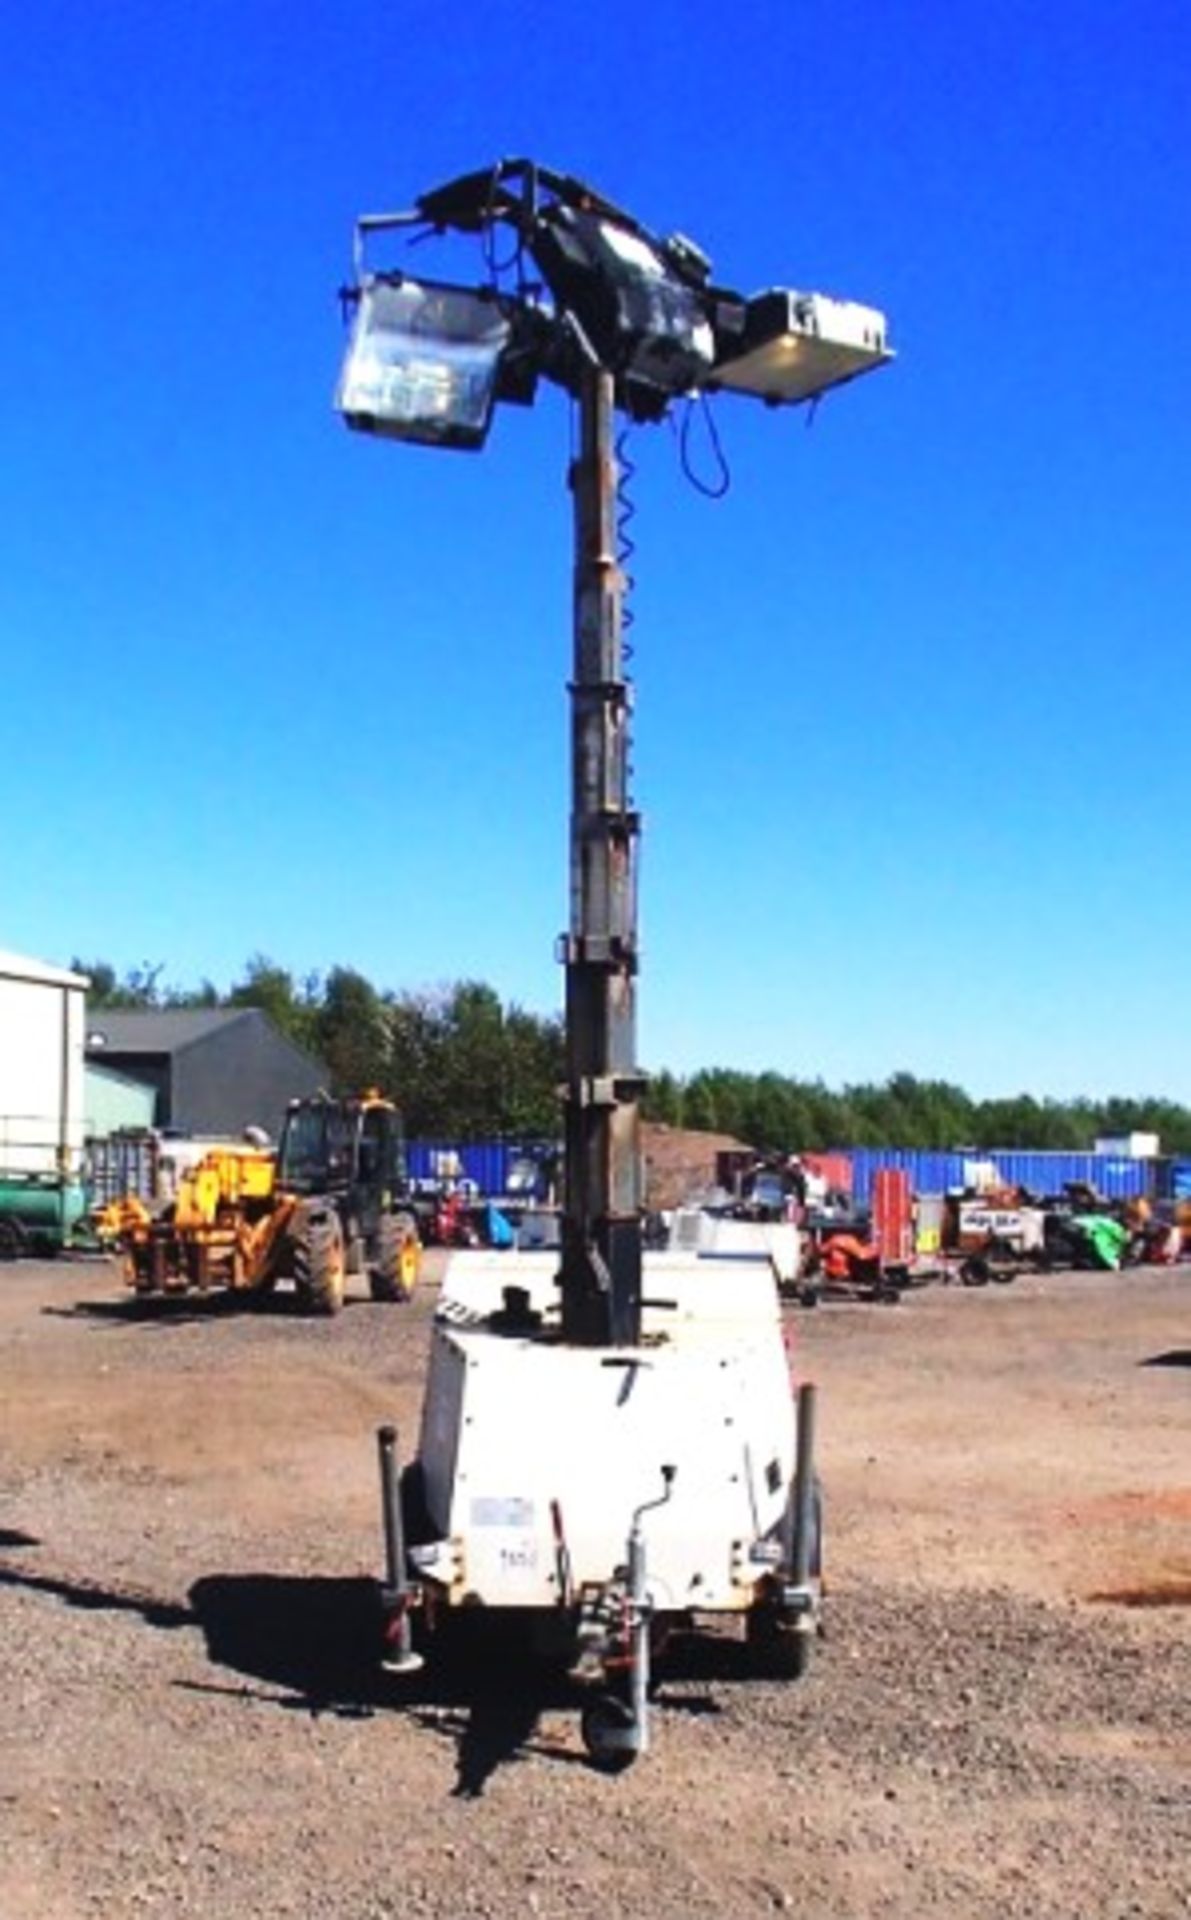 2010 SMC TL-90 SN t90108721 TOWABLE TOWER LIGHTS. ENGINE POWR 7.7KW@1500RPM. 932 HRS